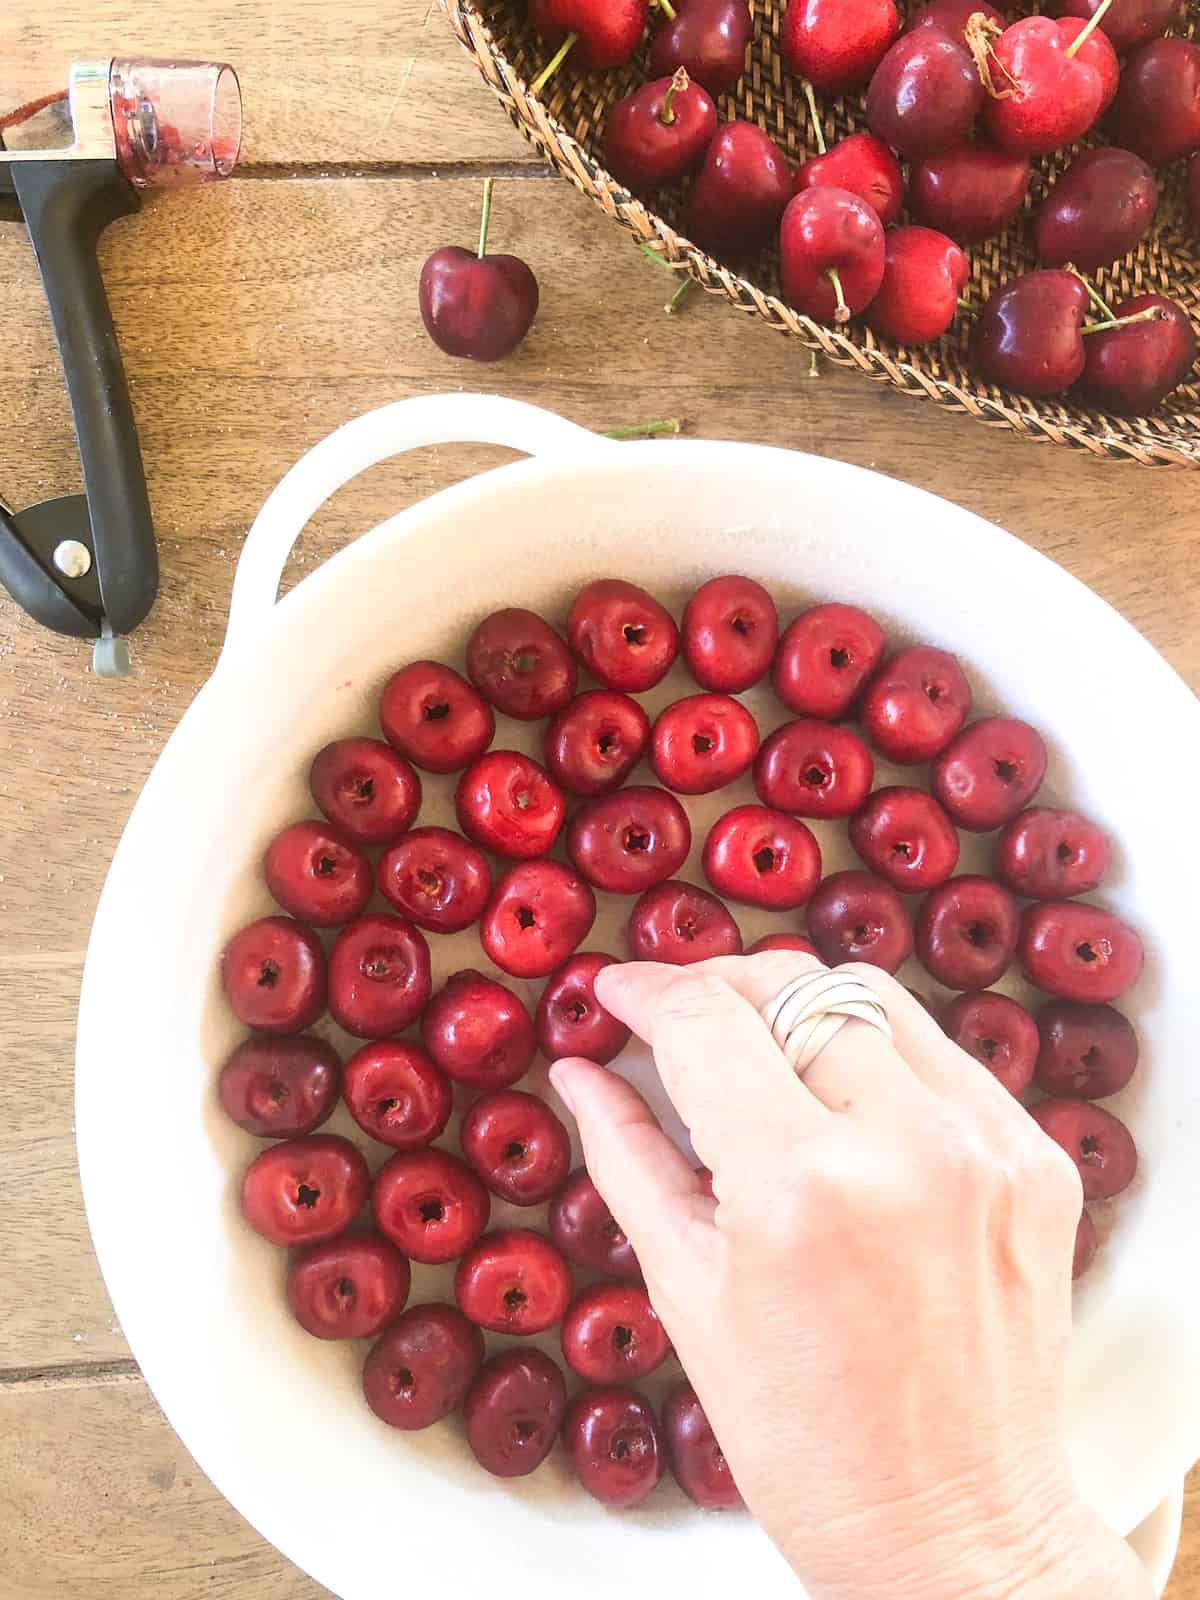 Arrange the cherries to cover the entire bottom of the baking dish.